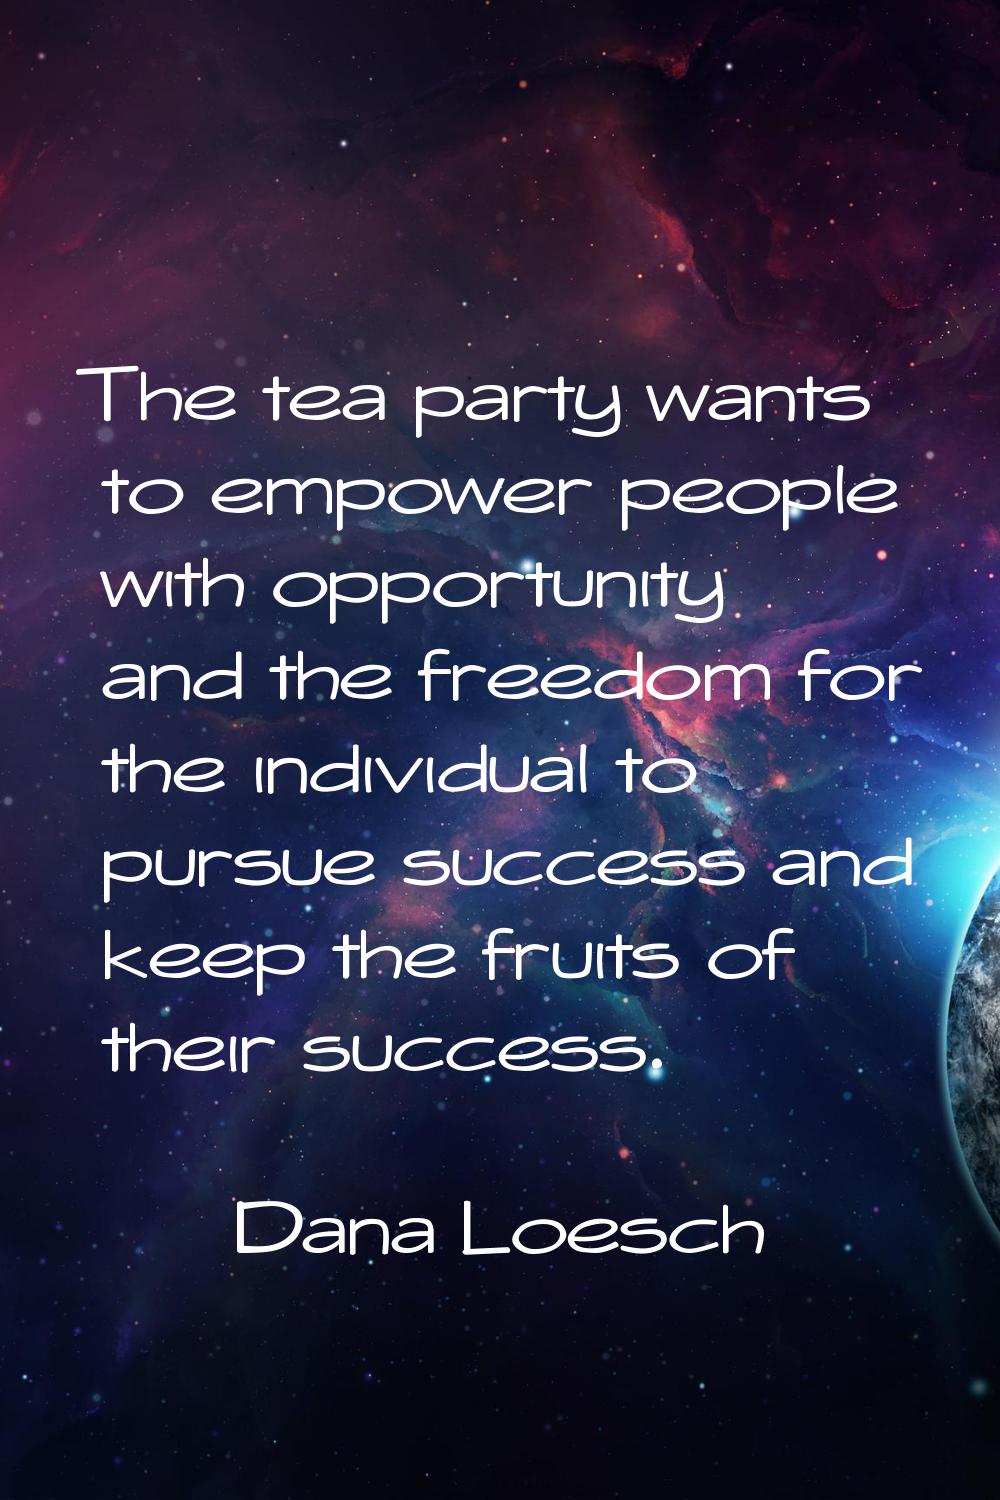 The tea party wants to empower people with opportunity and the freedom for the individual to pursue